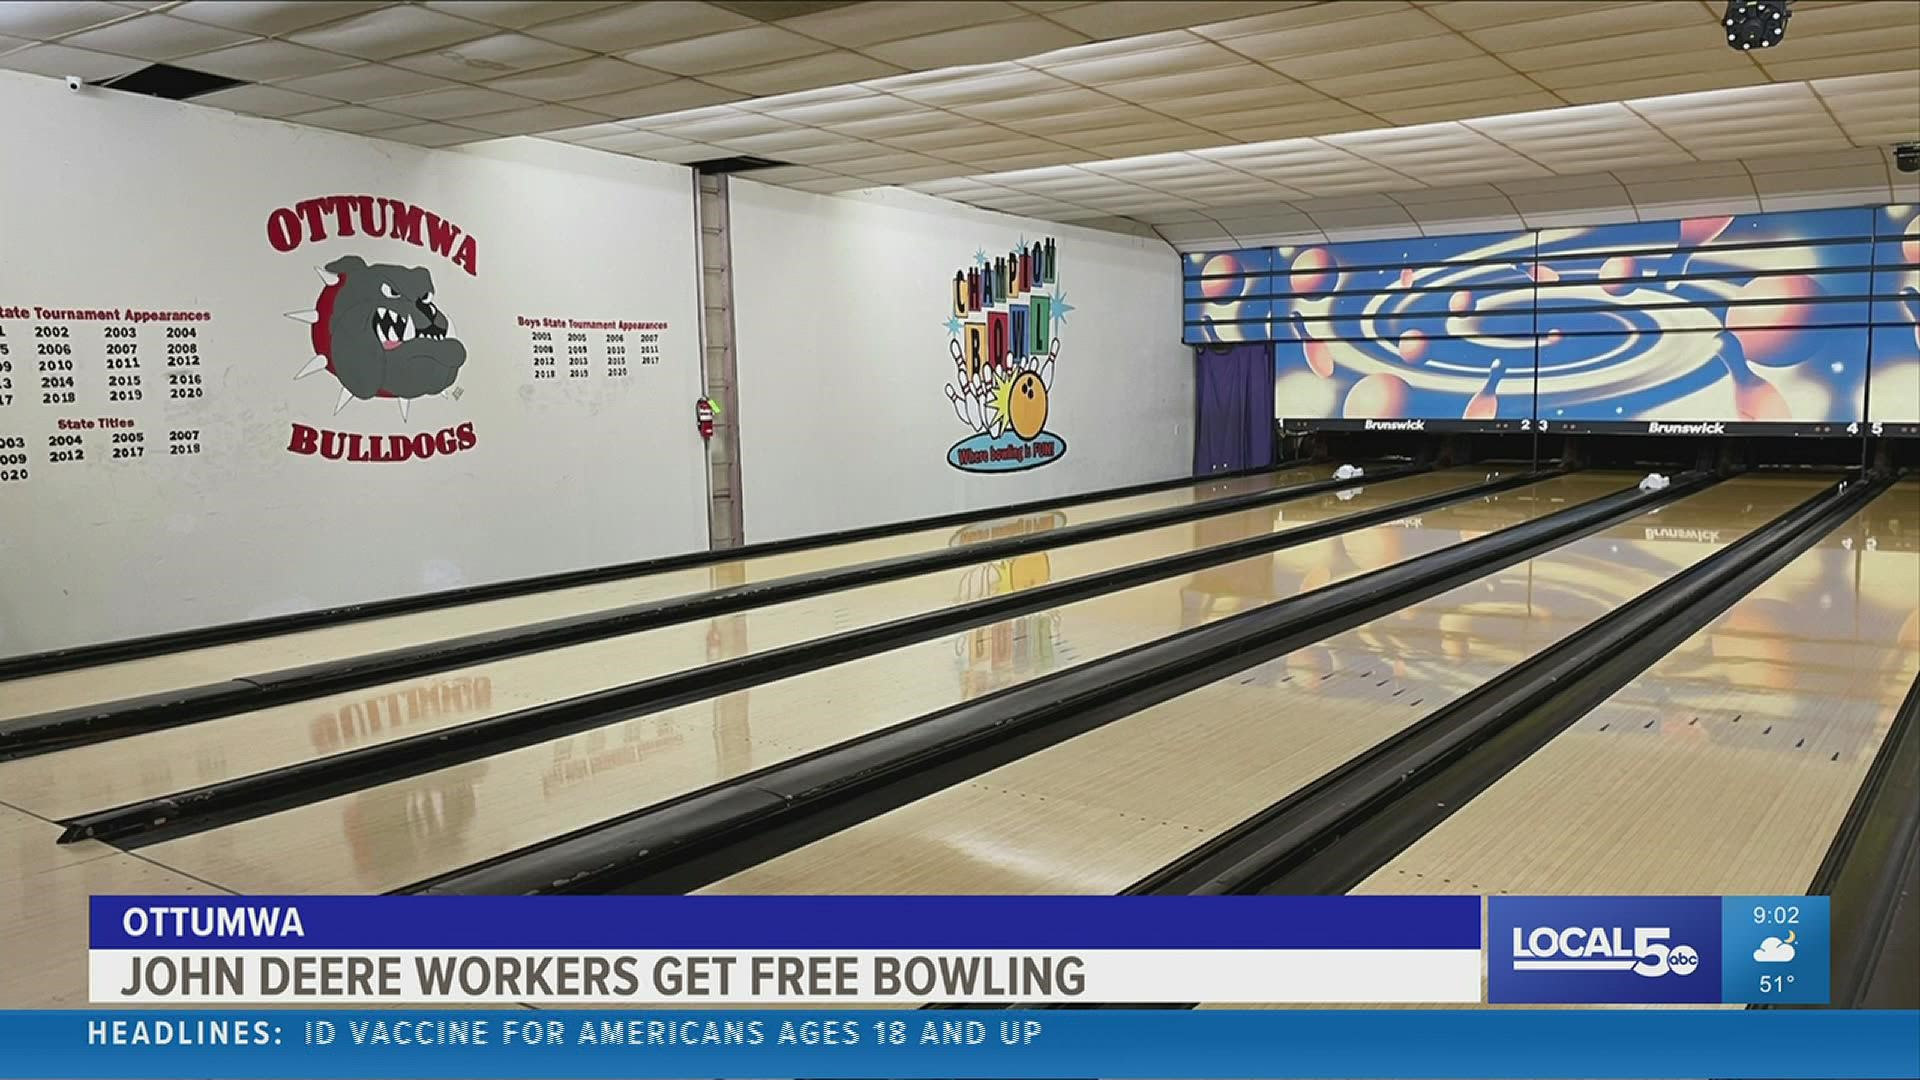 Champion Bowling owner Mark Frymoyer is a former union worker and said he wants to support the John Deere employees during this stressful time.